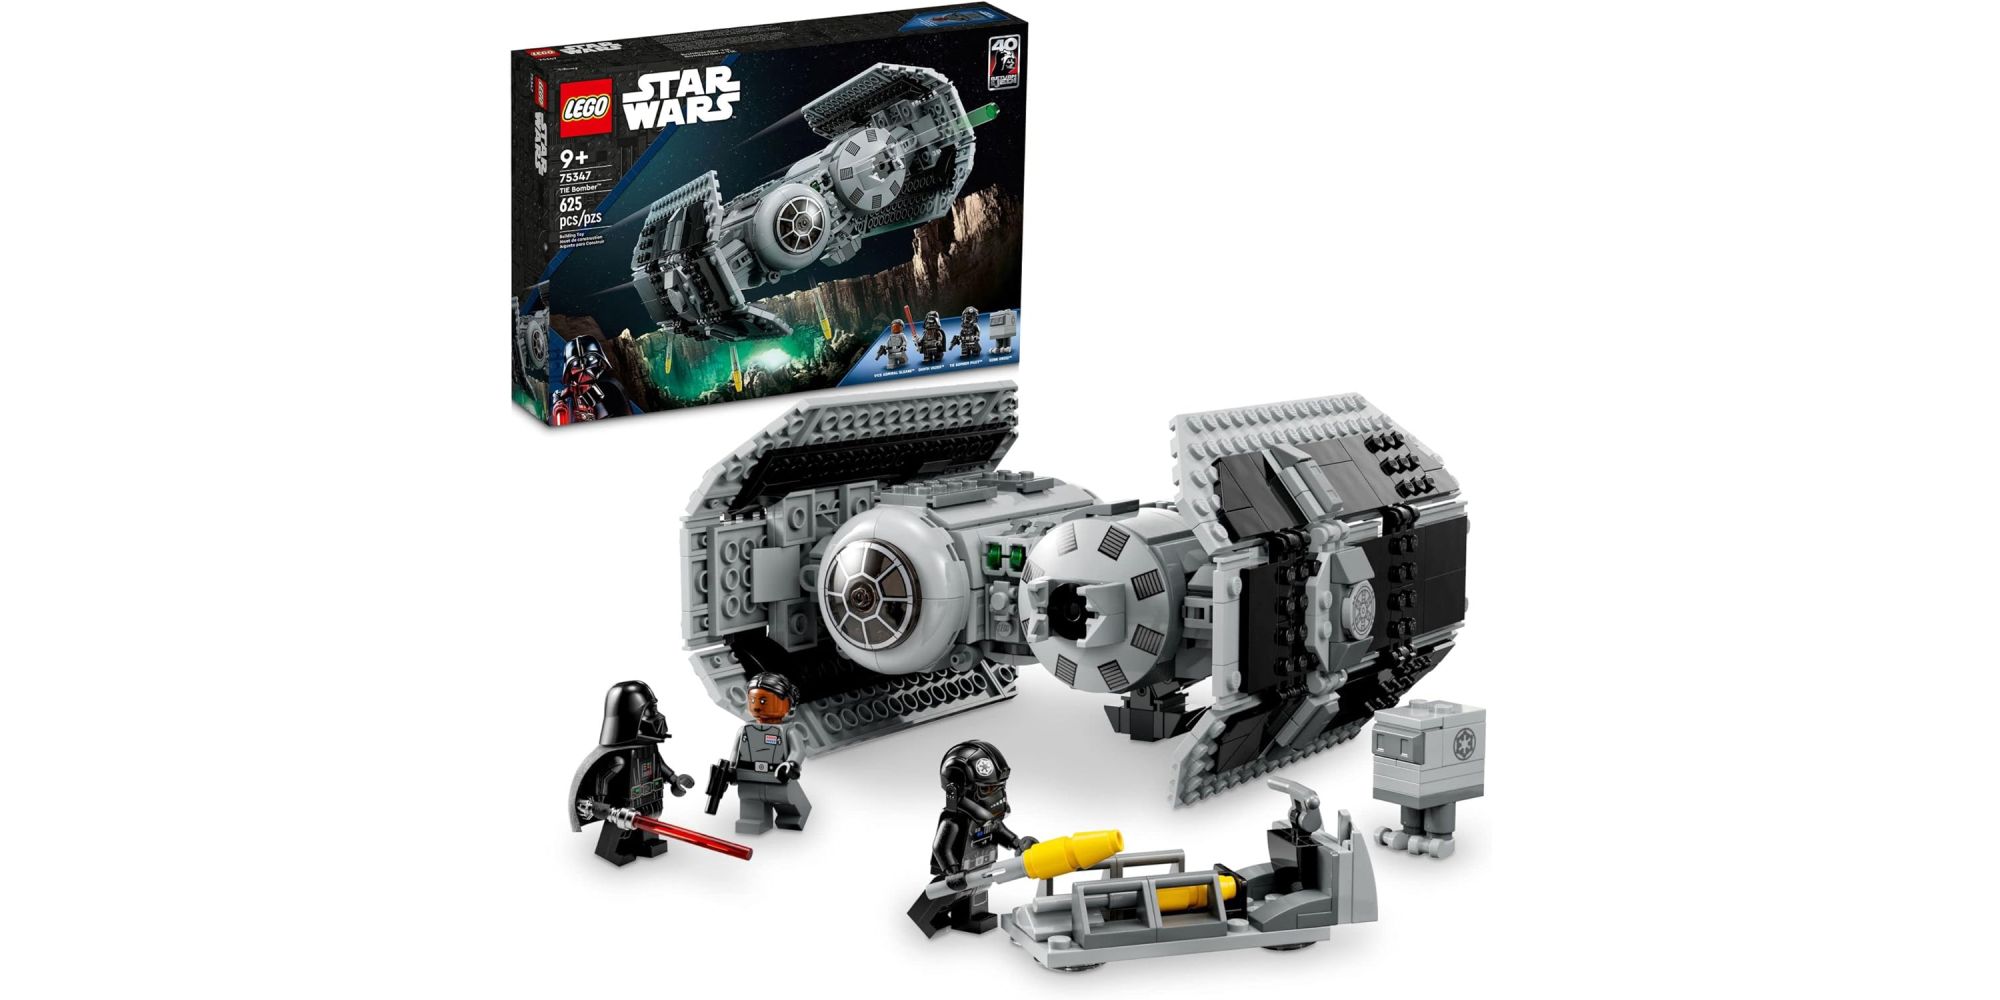 LEGO Star Wars TIE Bomber featuring the TIE Bomber and it's pilot, a Gonk Droid, Vice Admiral Sloane, and Darth Vader